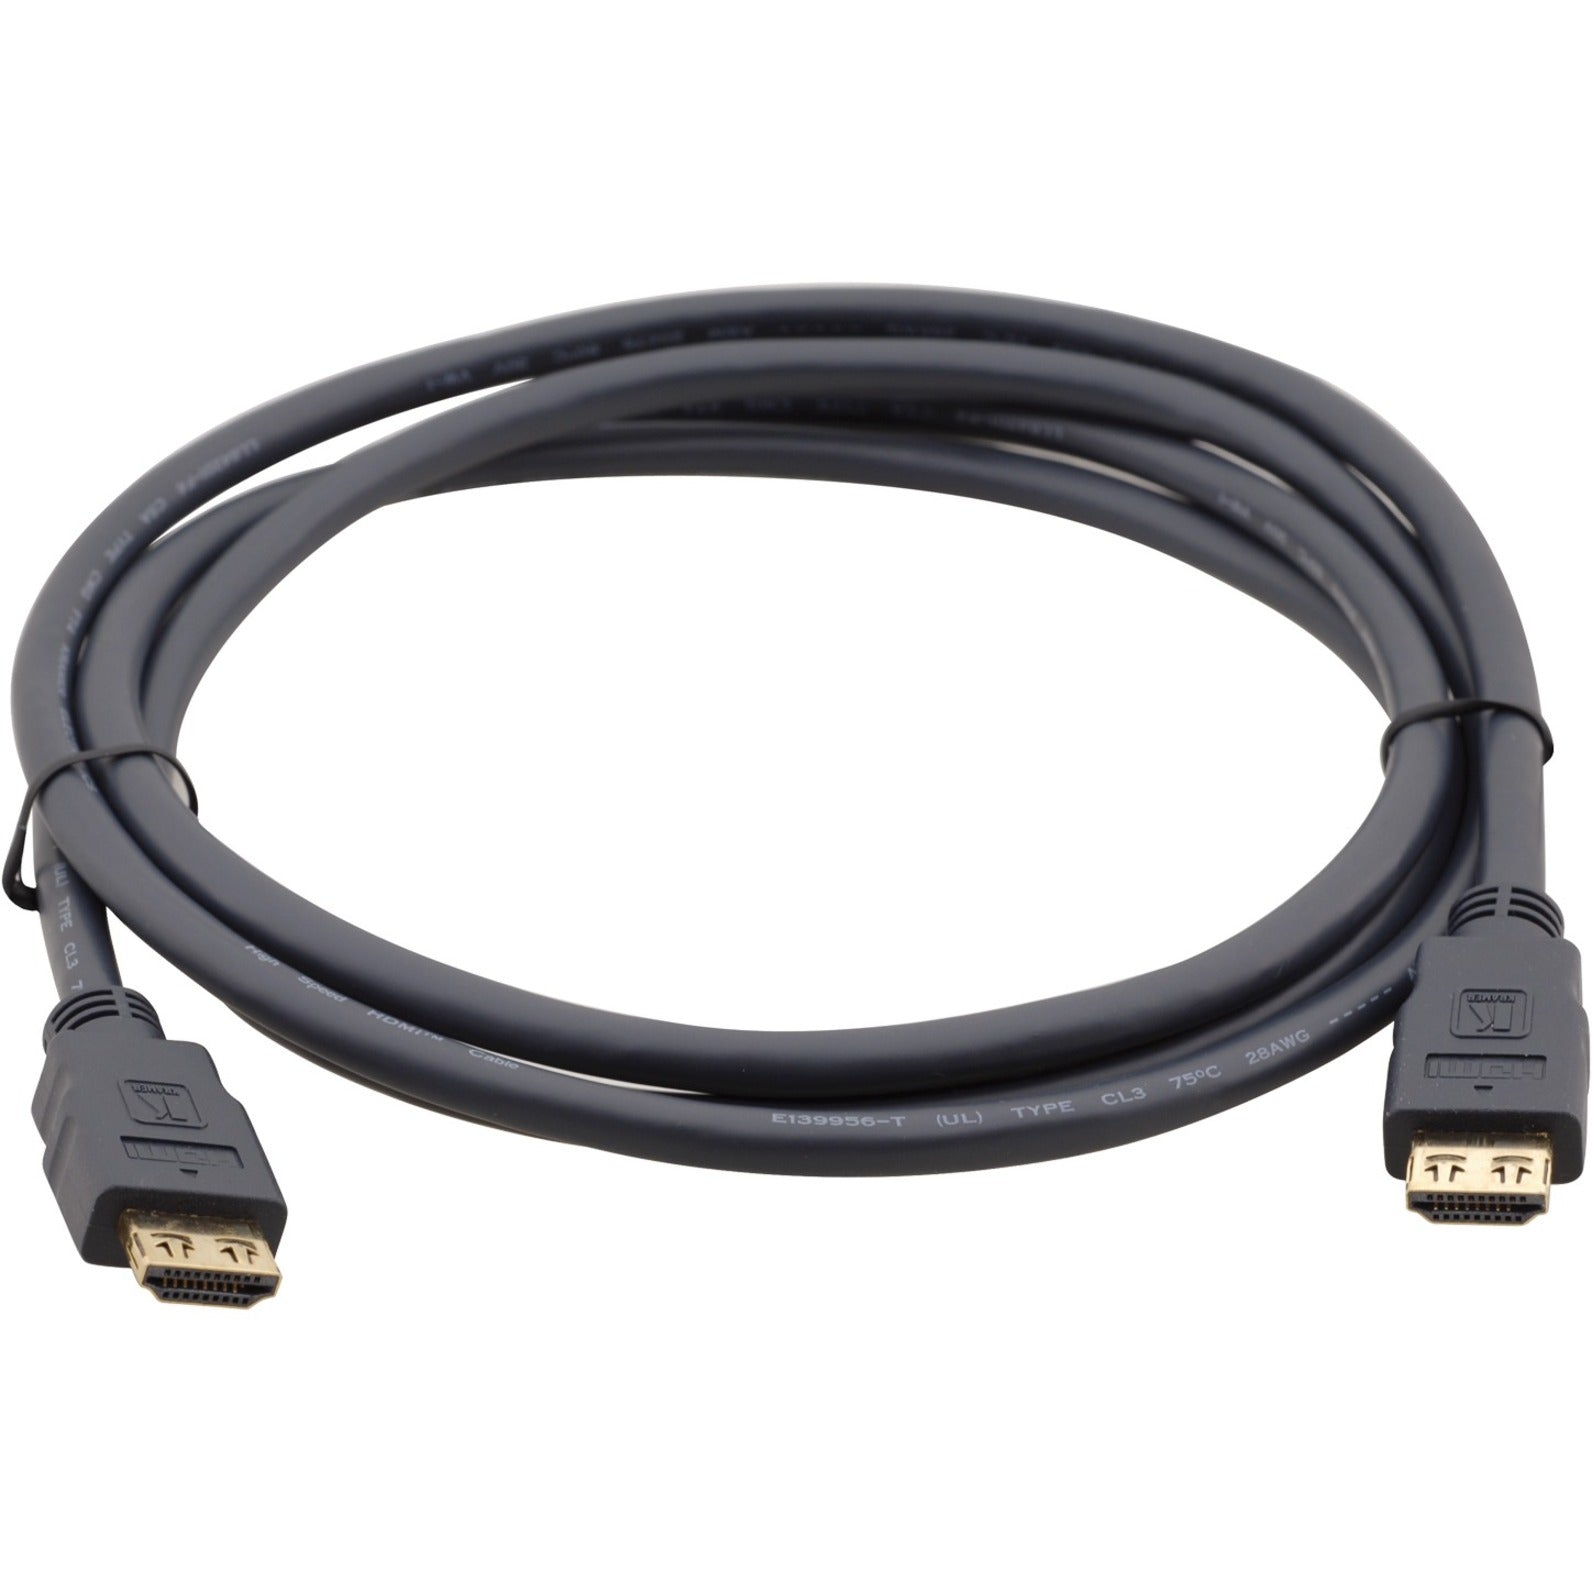 Kramer 97-0101015 Standard HDMI (M) to HDMI (M) Cable, 15 ft, Gold Plated, K-Lock, Molded